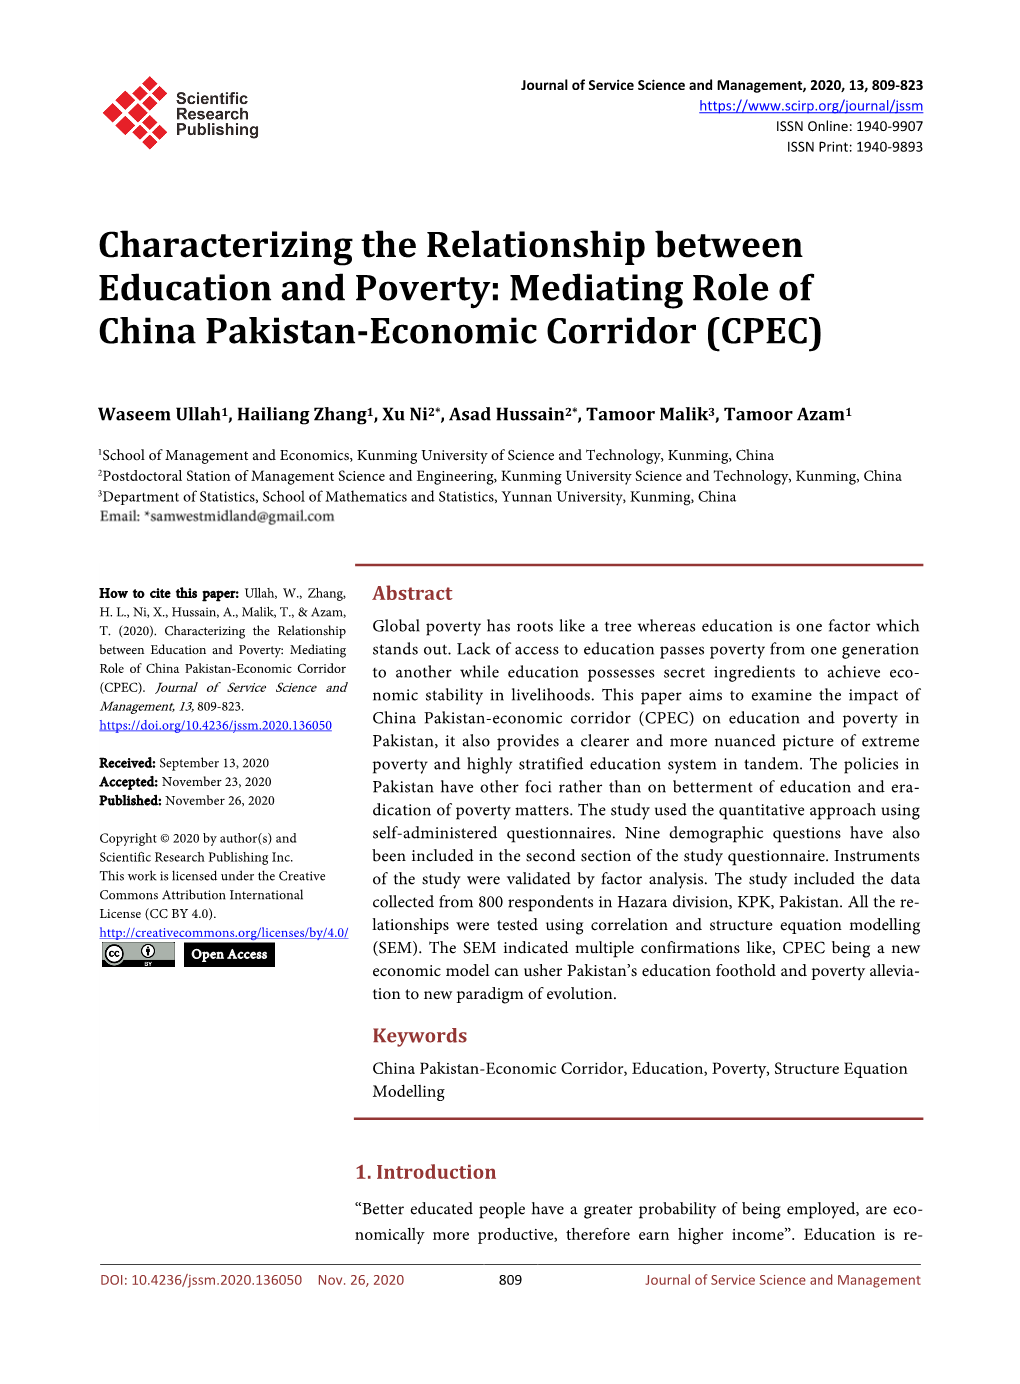 Characterizing the Relationship Between Education and Poverty: Mediating Role of China Pakistan-Economic Corridor (CPEC)